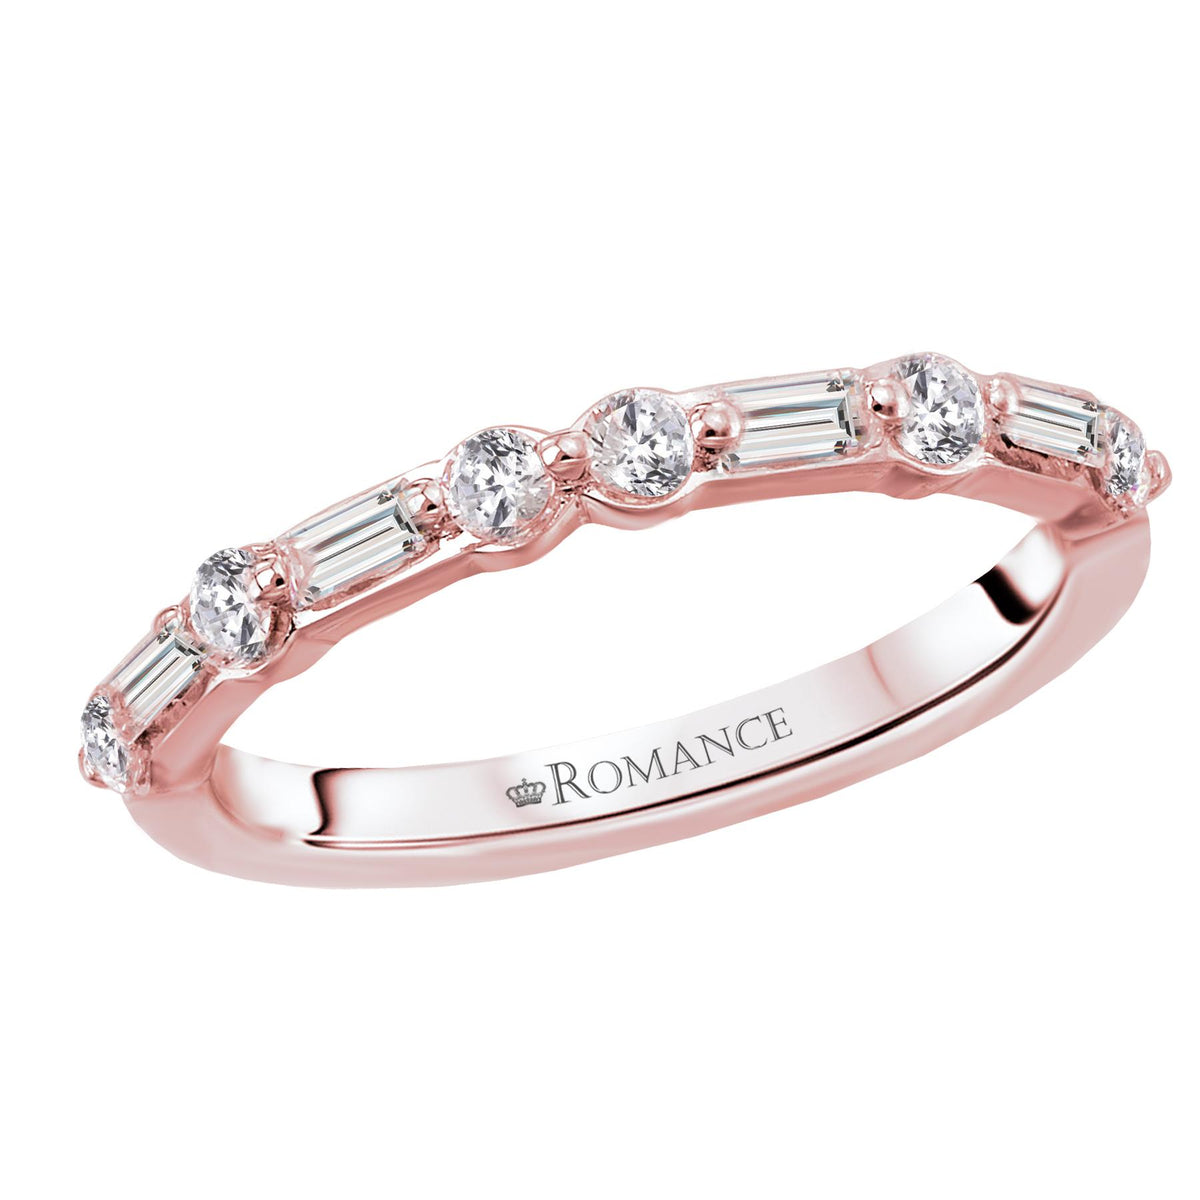 14KT Gold 3/8 CTW Round & Baguette Diamond Band Rose / 4,Rose / 4.5,Rose / 5,Rose / 5.5,Rose / 6,Rose / 6.5,Rose / 7,Rose / 7.5,Rose / 8,Rose / 8.5,Rose / 9